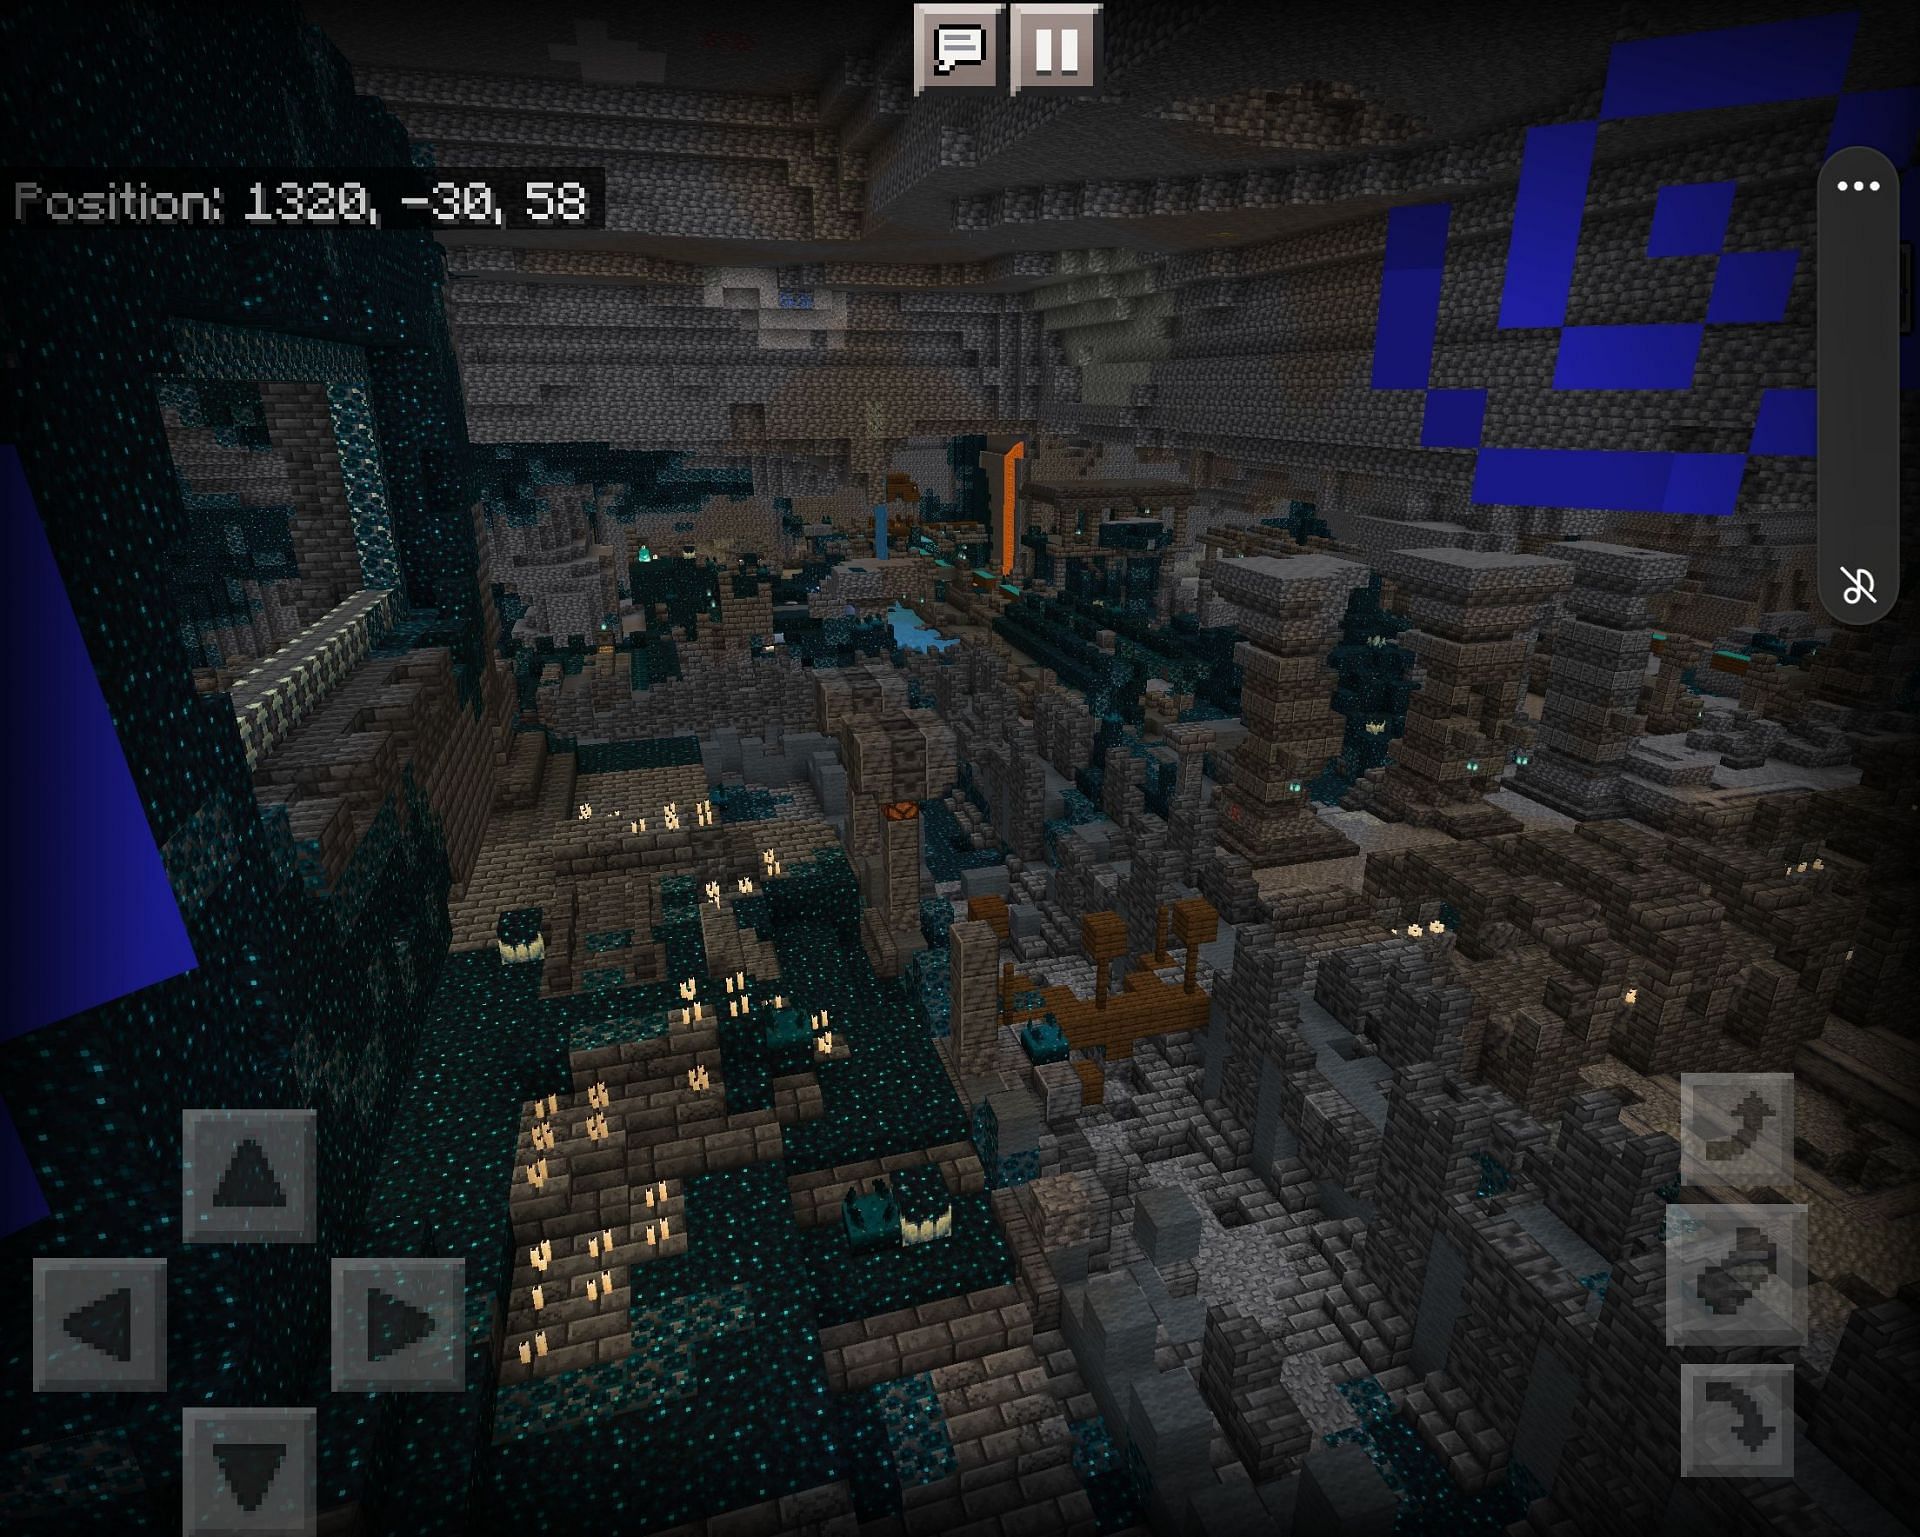 One of the ancient cities found on the seed (Image via Minecraft)